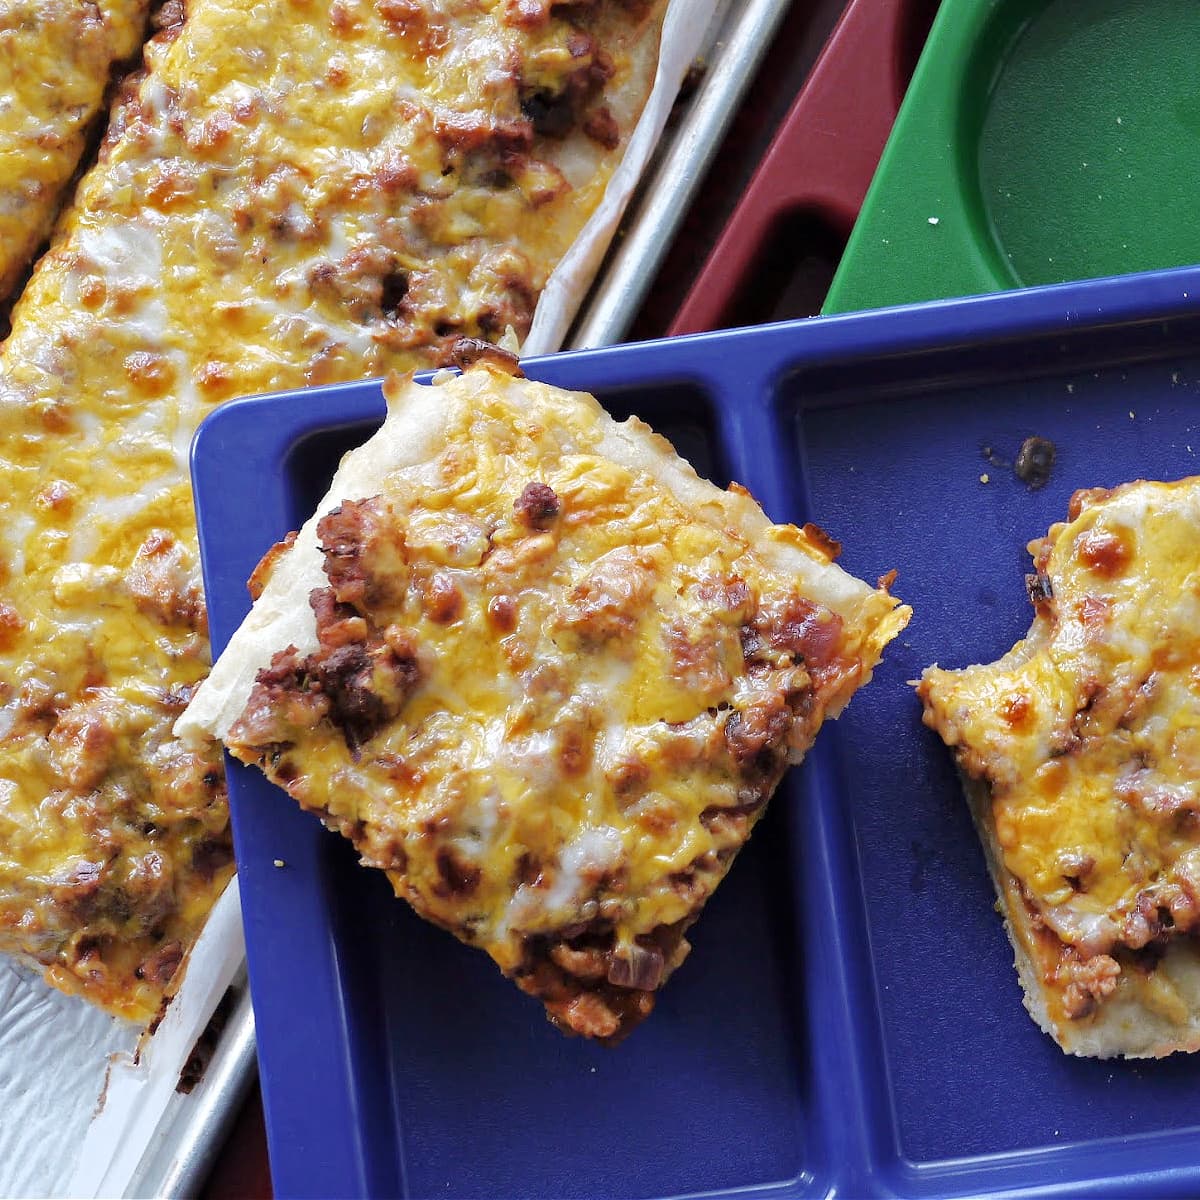 Two pieces of cheese-topped pizza cut into square (one with a bite taken out) resting on a plastic school lunch tray. More pizza on baking tray in background.  